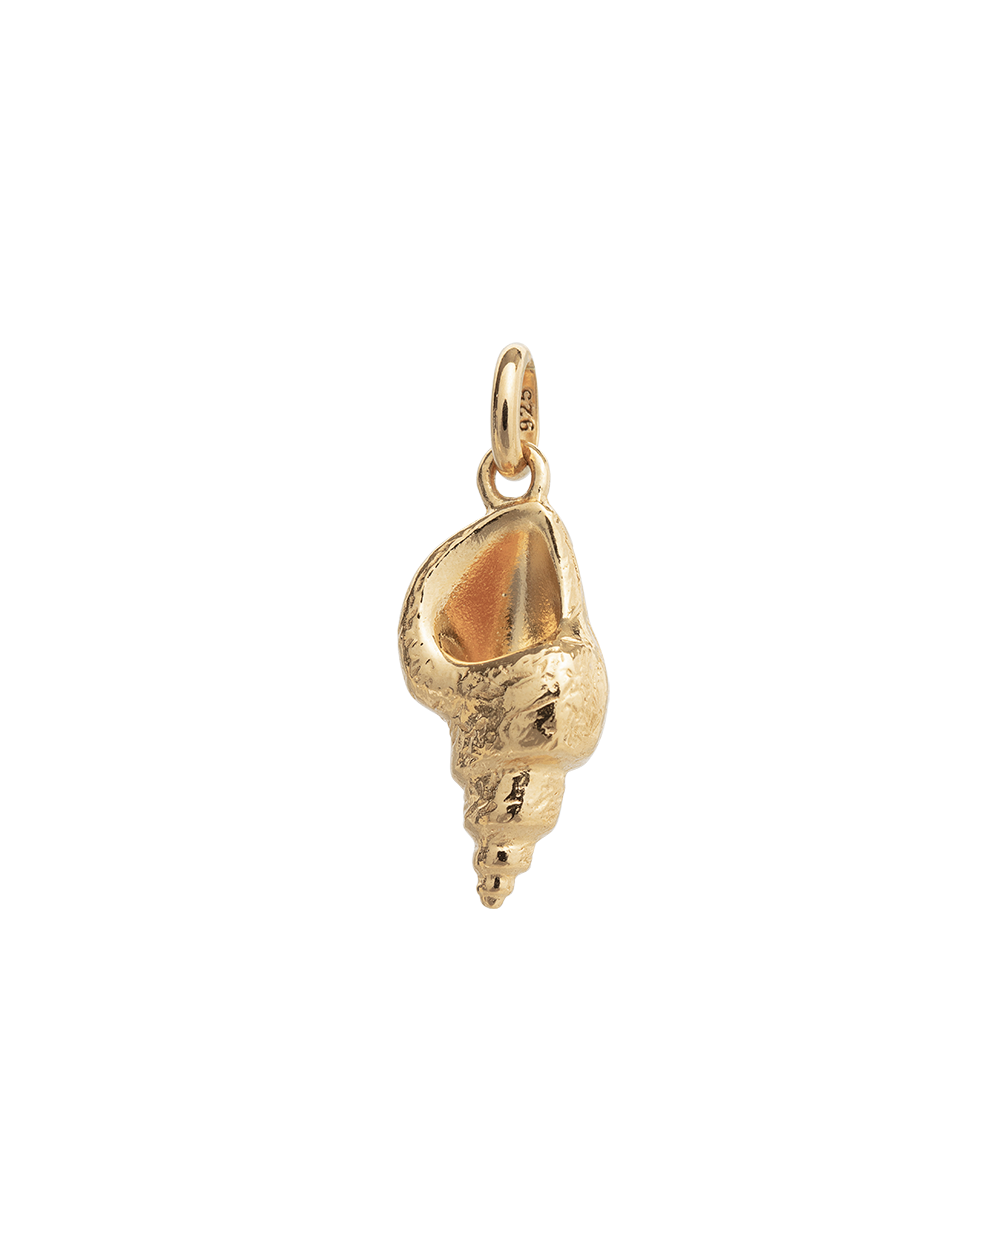 CONCH SHELL (18K GOLD VERMEIL) - IMAGE 1